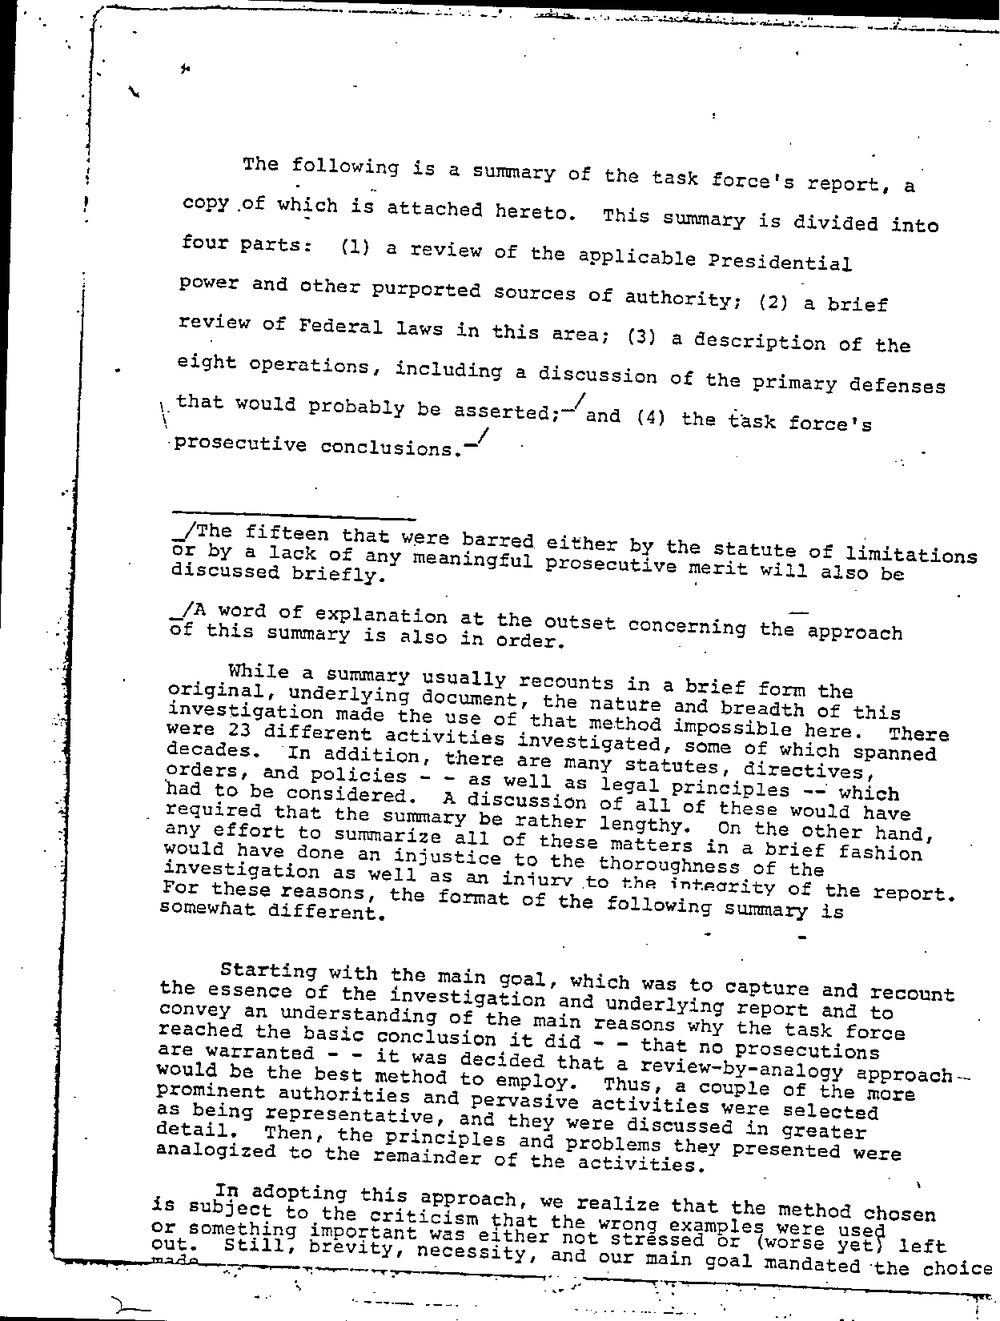 Page 3 from Department of Justice Prosecutive Summary into NSA and CIA Criminal Activities